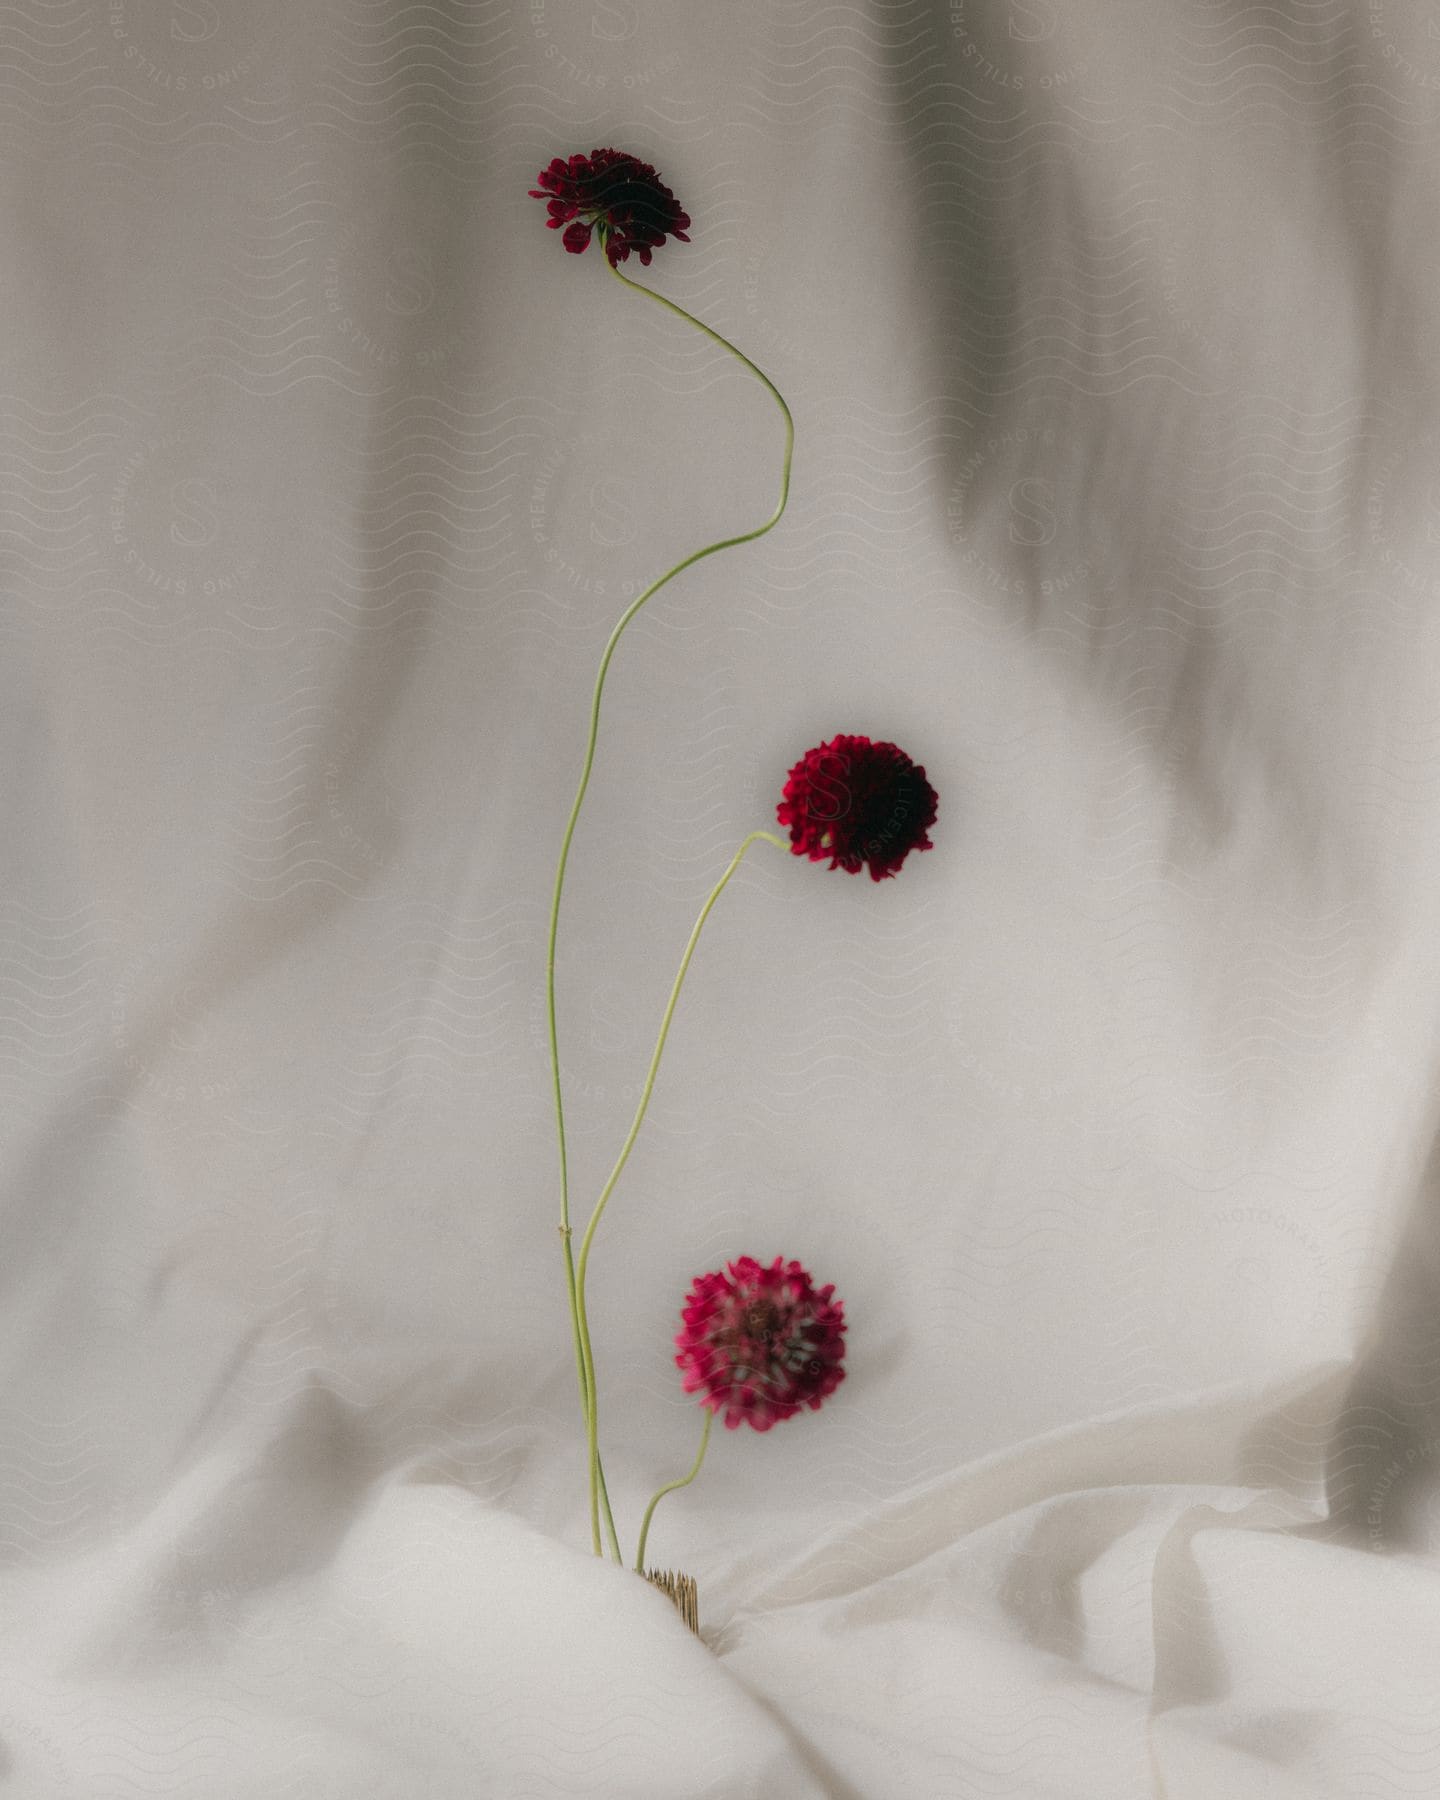 Three red flowers in front of a white cloth backdrop